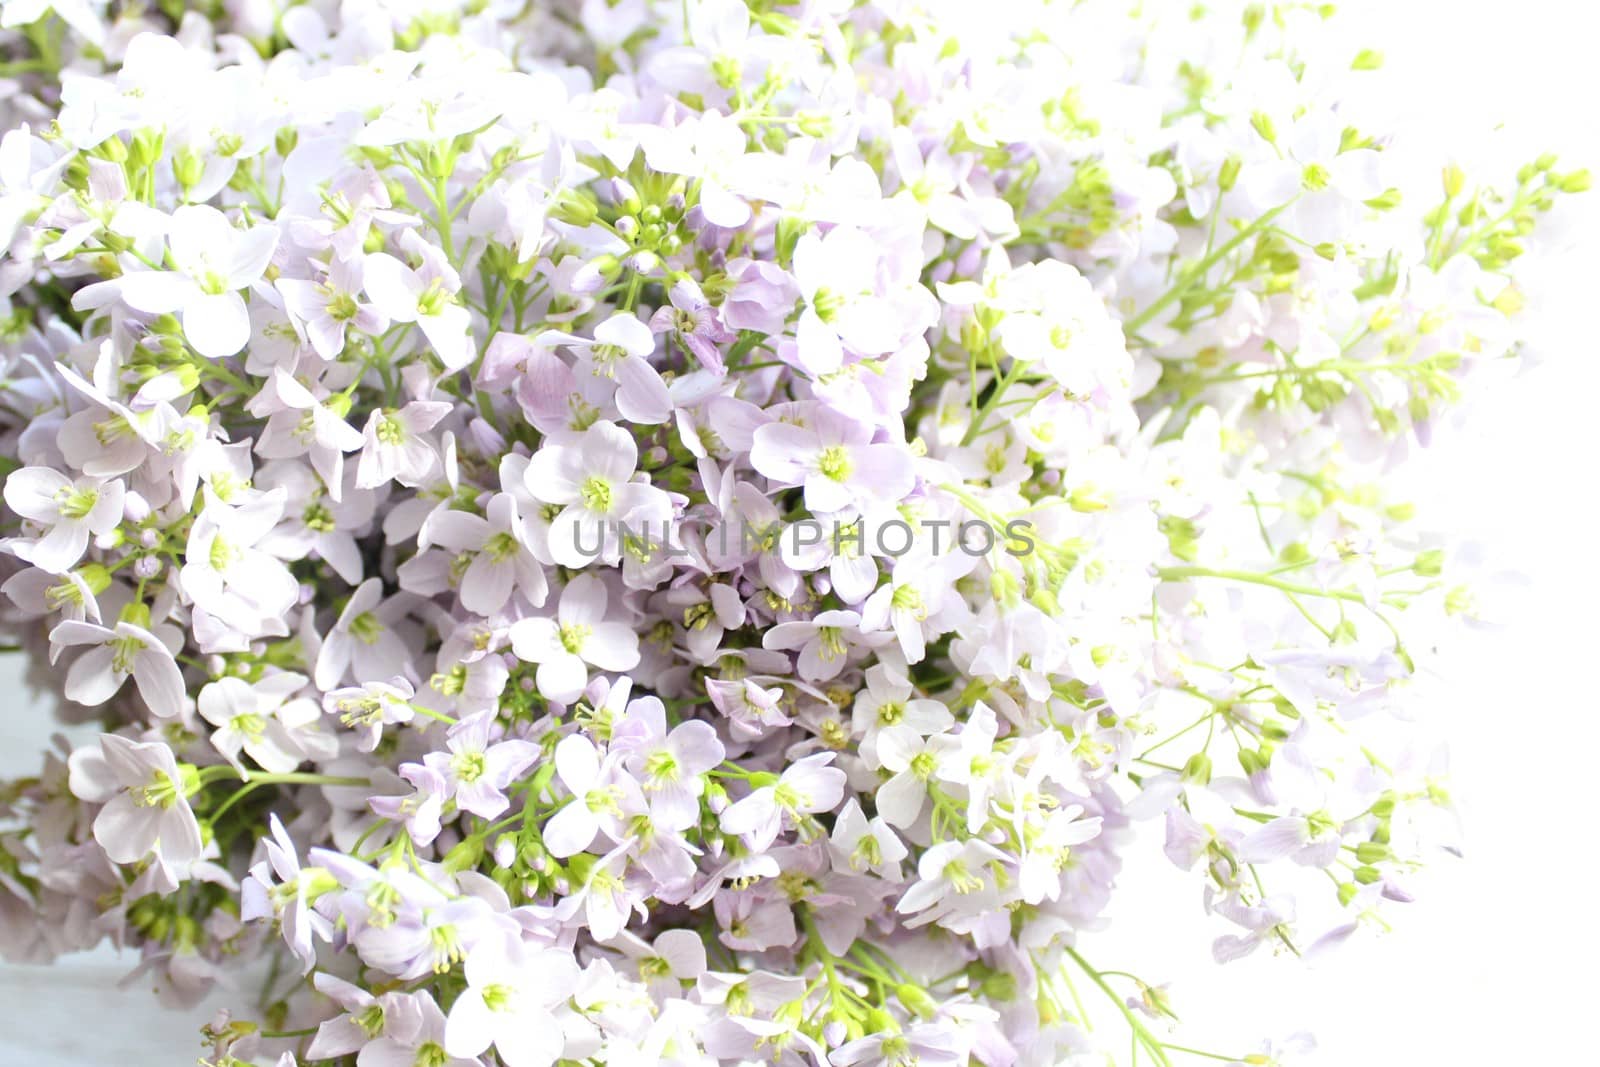 many cuckoo flowers on white wooden boards by martina_unbehauen